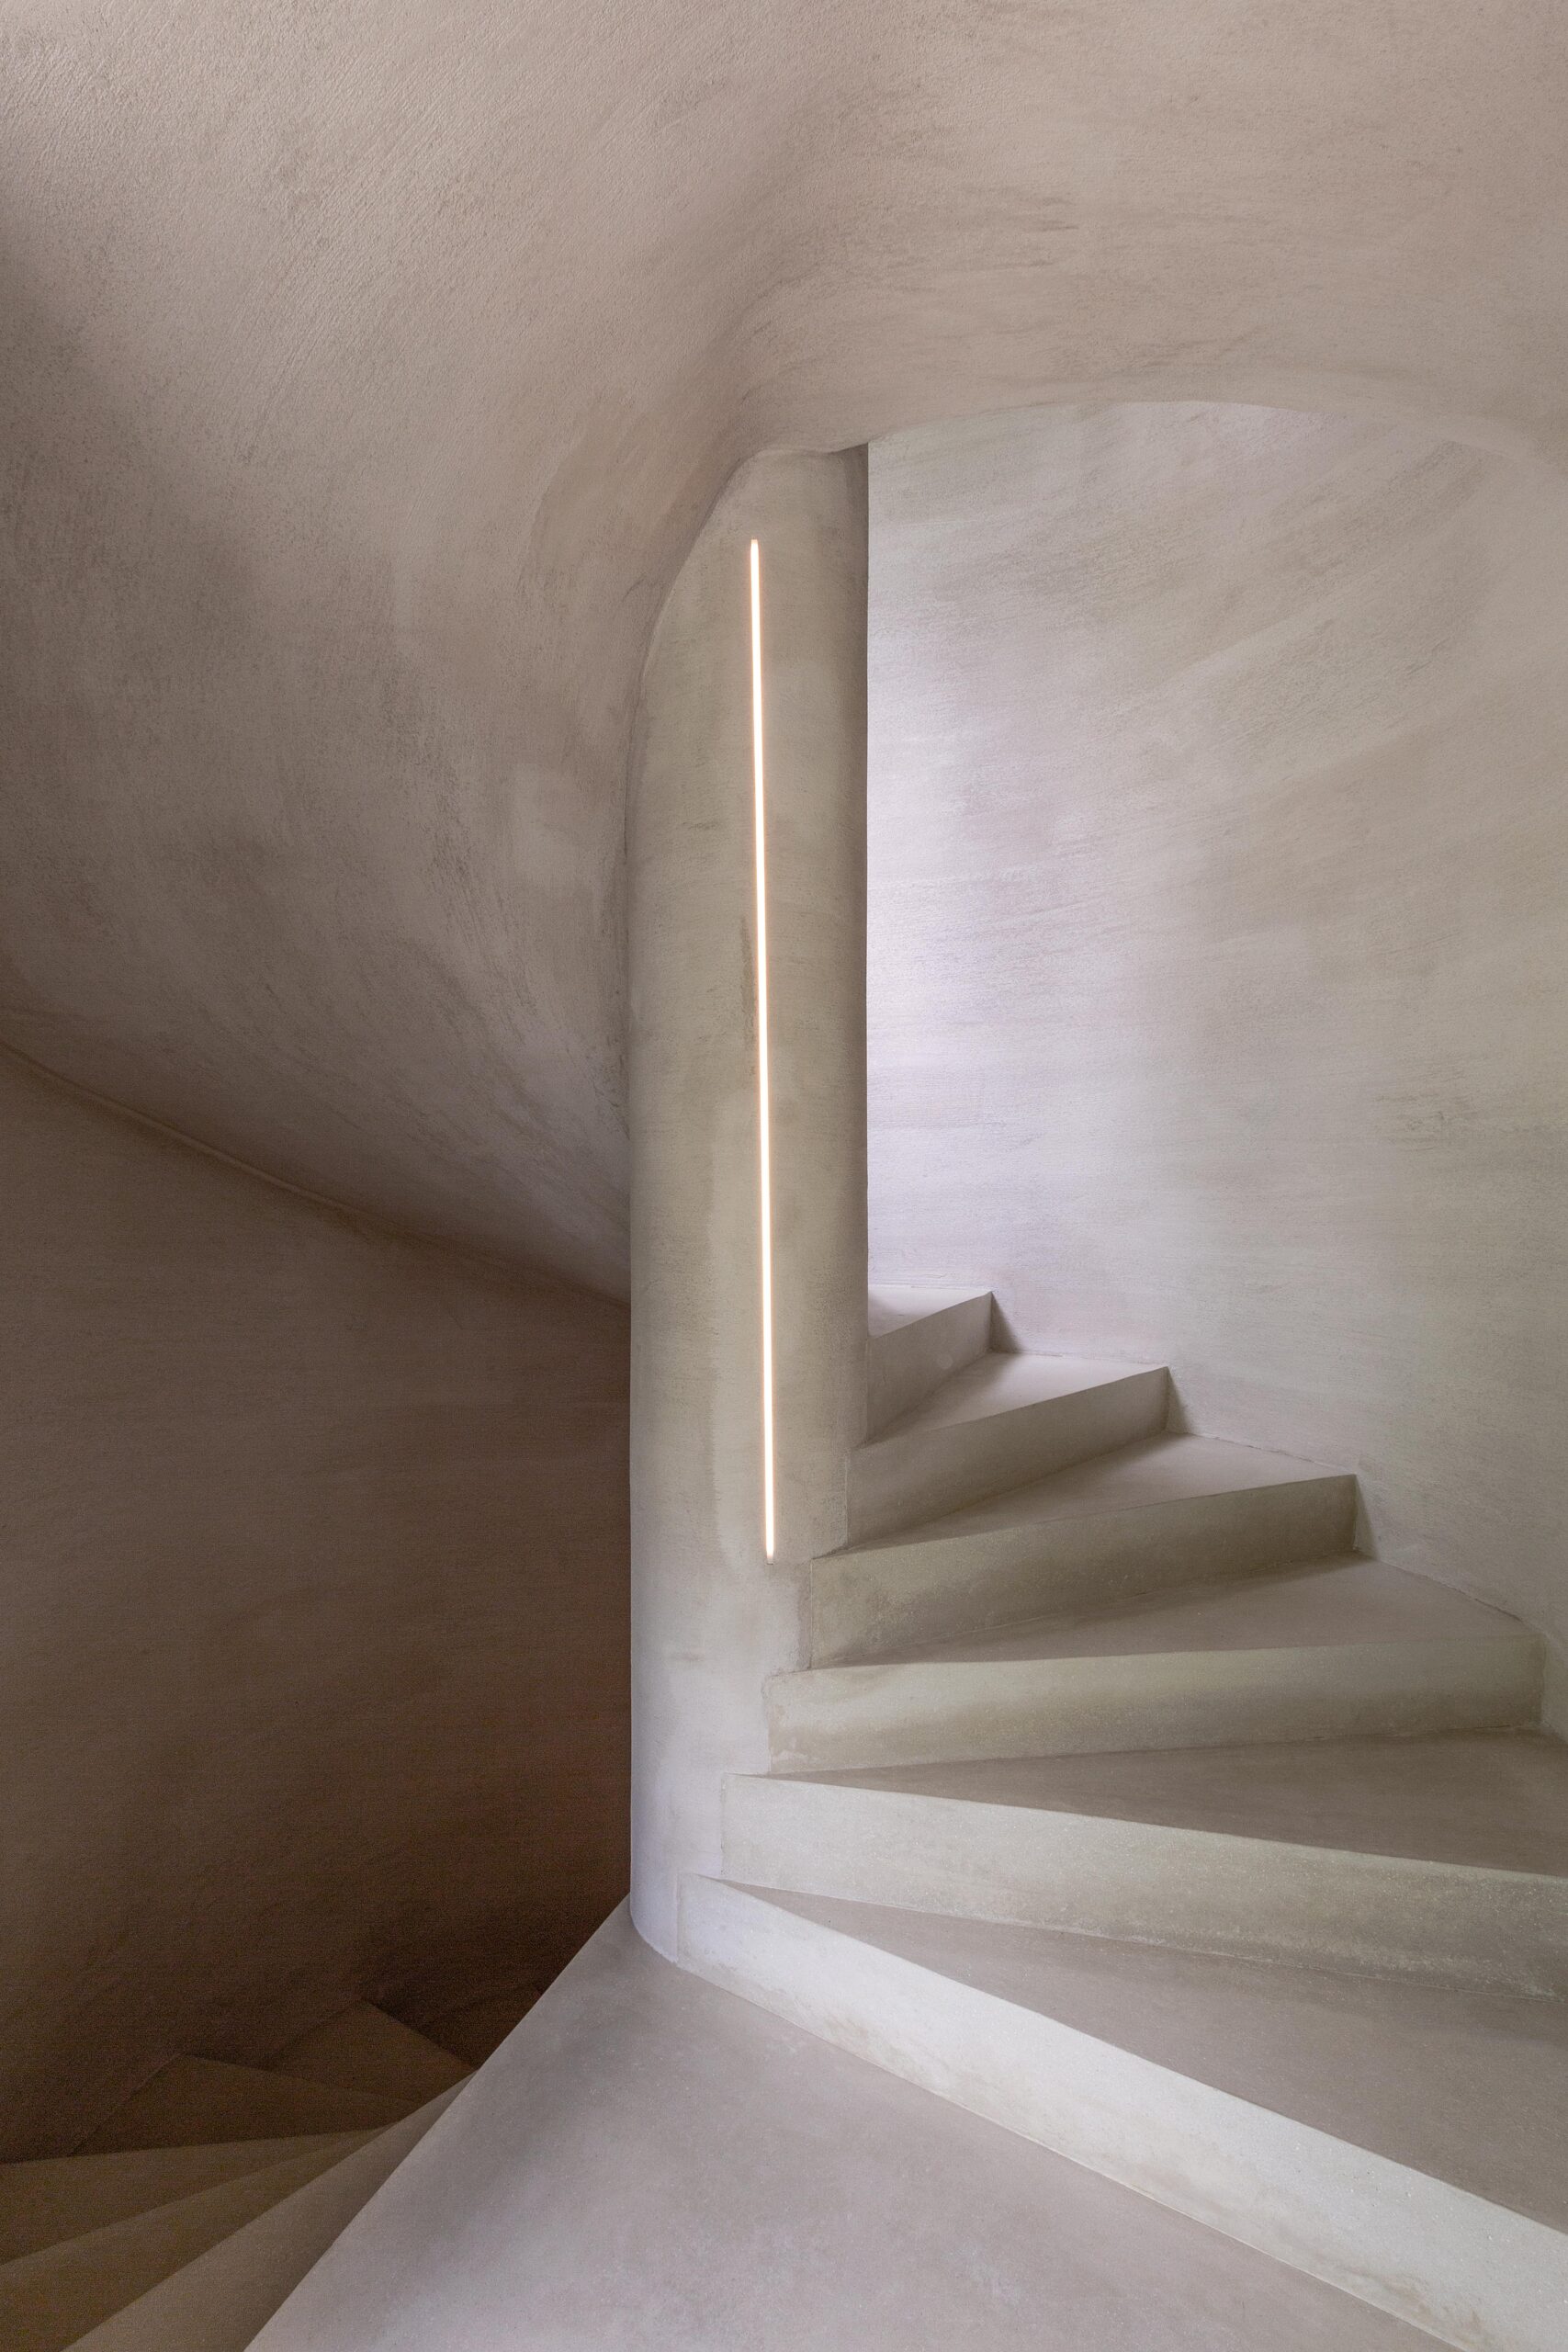 Minimalistic staircase with soft lighting and smooth plastered walls.